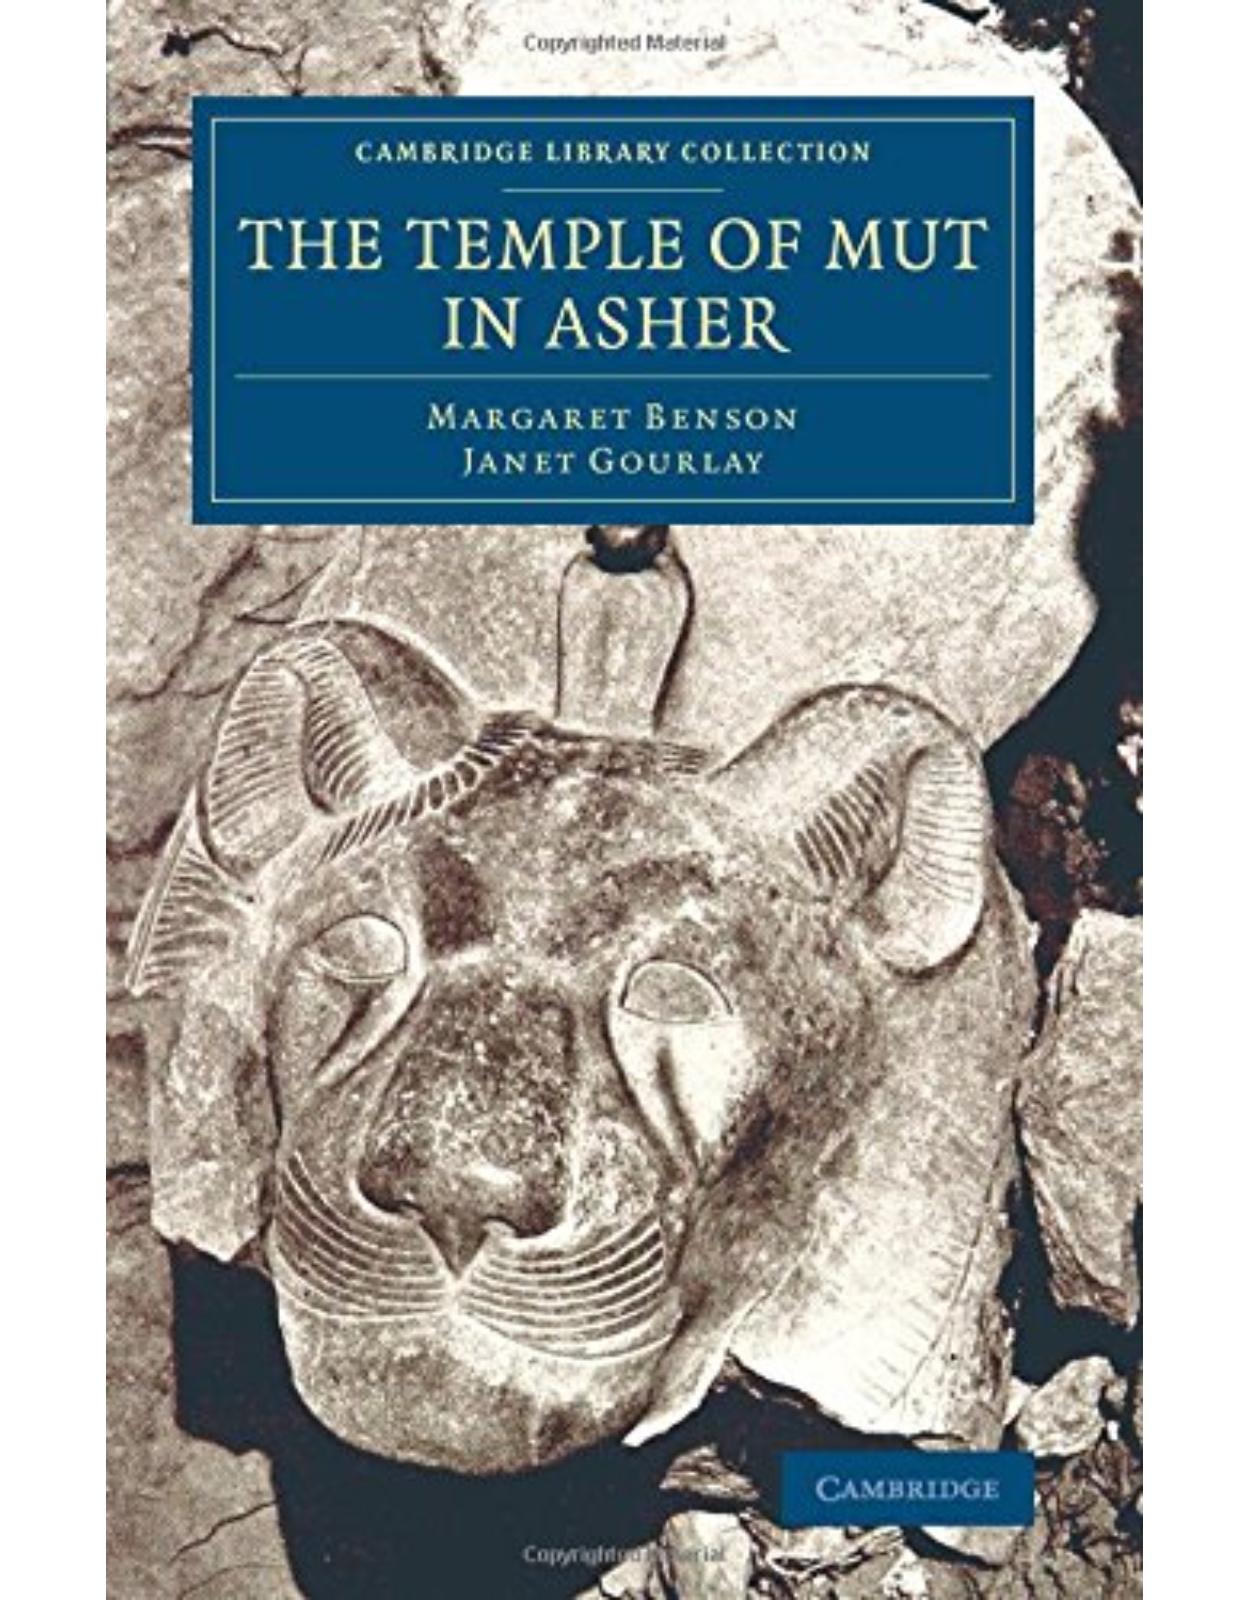 The Temple of Mut in Asher: An Account of the Excavation of the Temple and of the Religious Representations and Objects Found Therein, as Illustrating ... (Cambridge Library Collection - Egyptology)